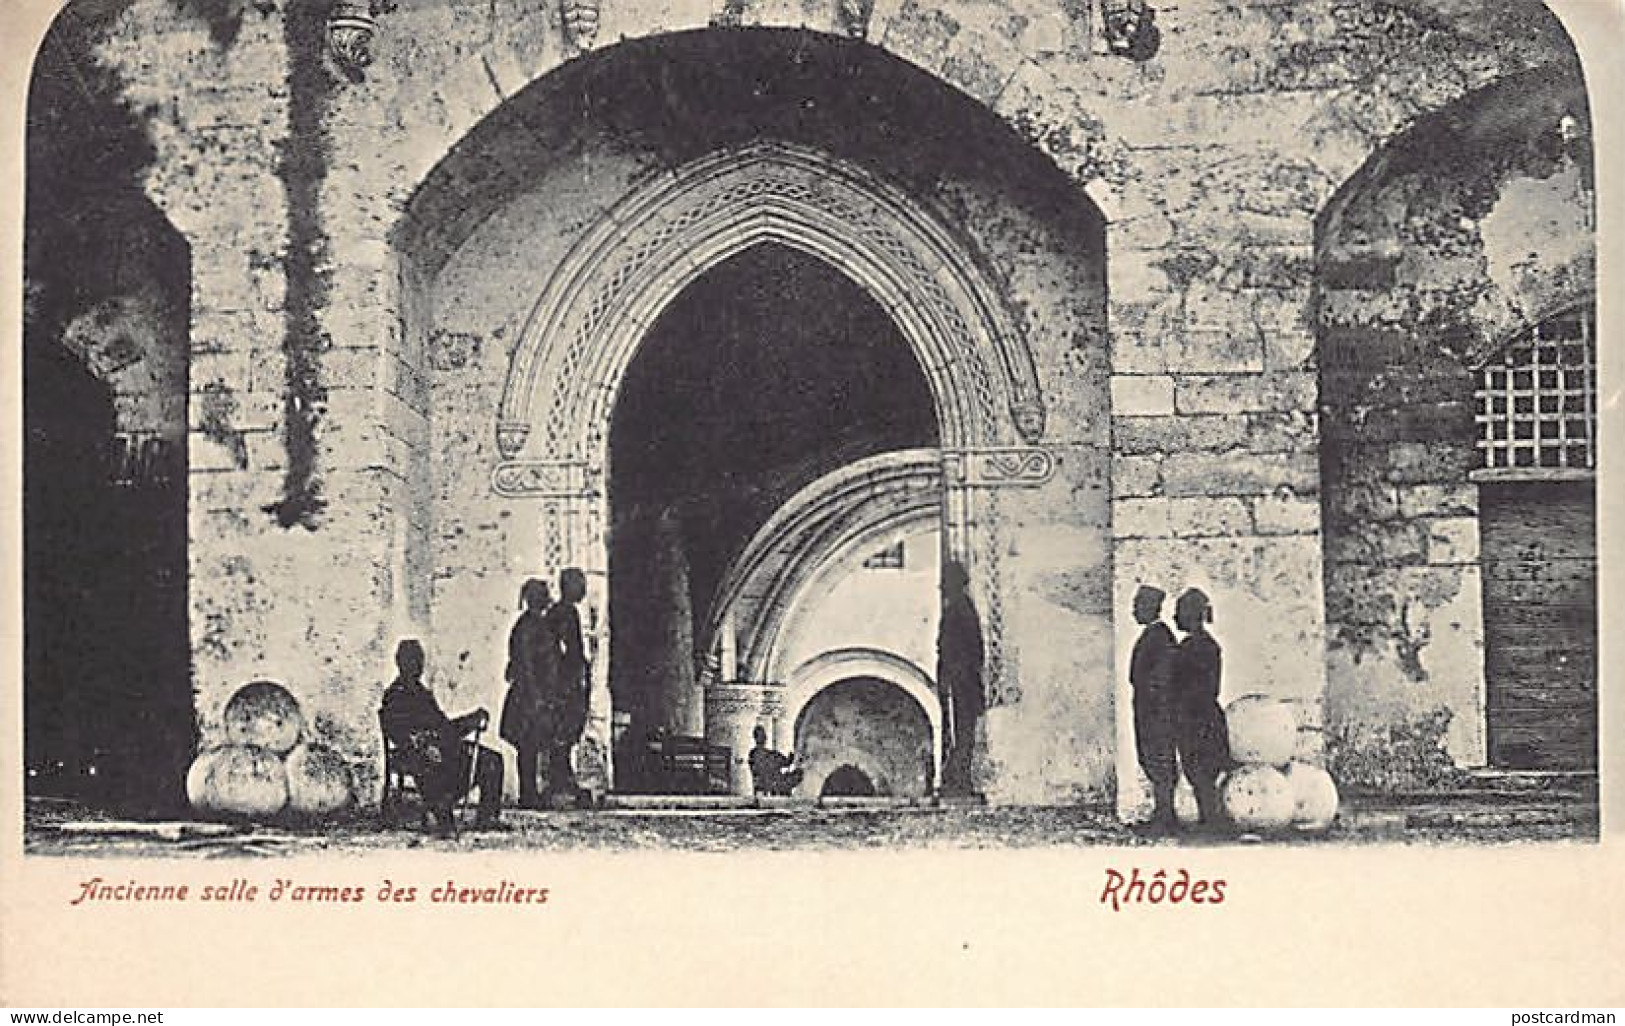 Greece - RHODES - Former Knights' Armory - Publ. Unknown  - Griechenland